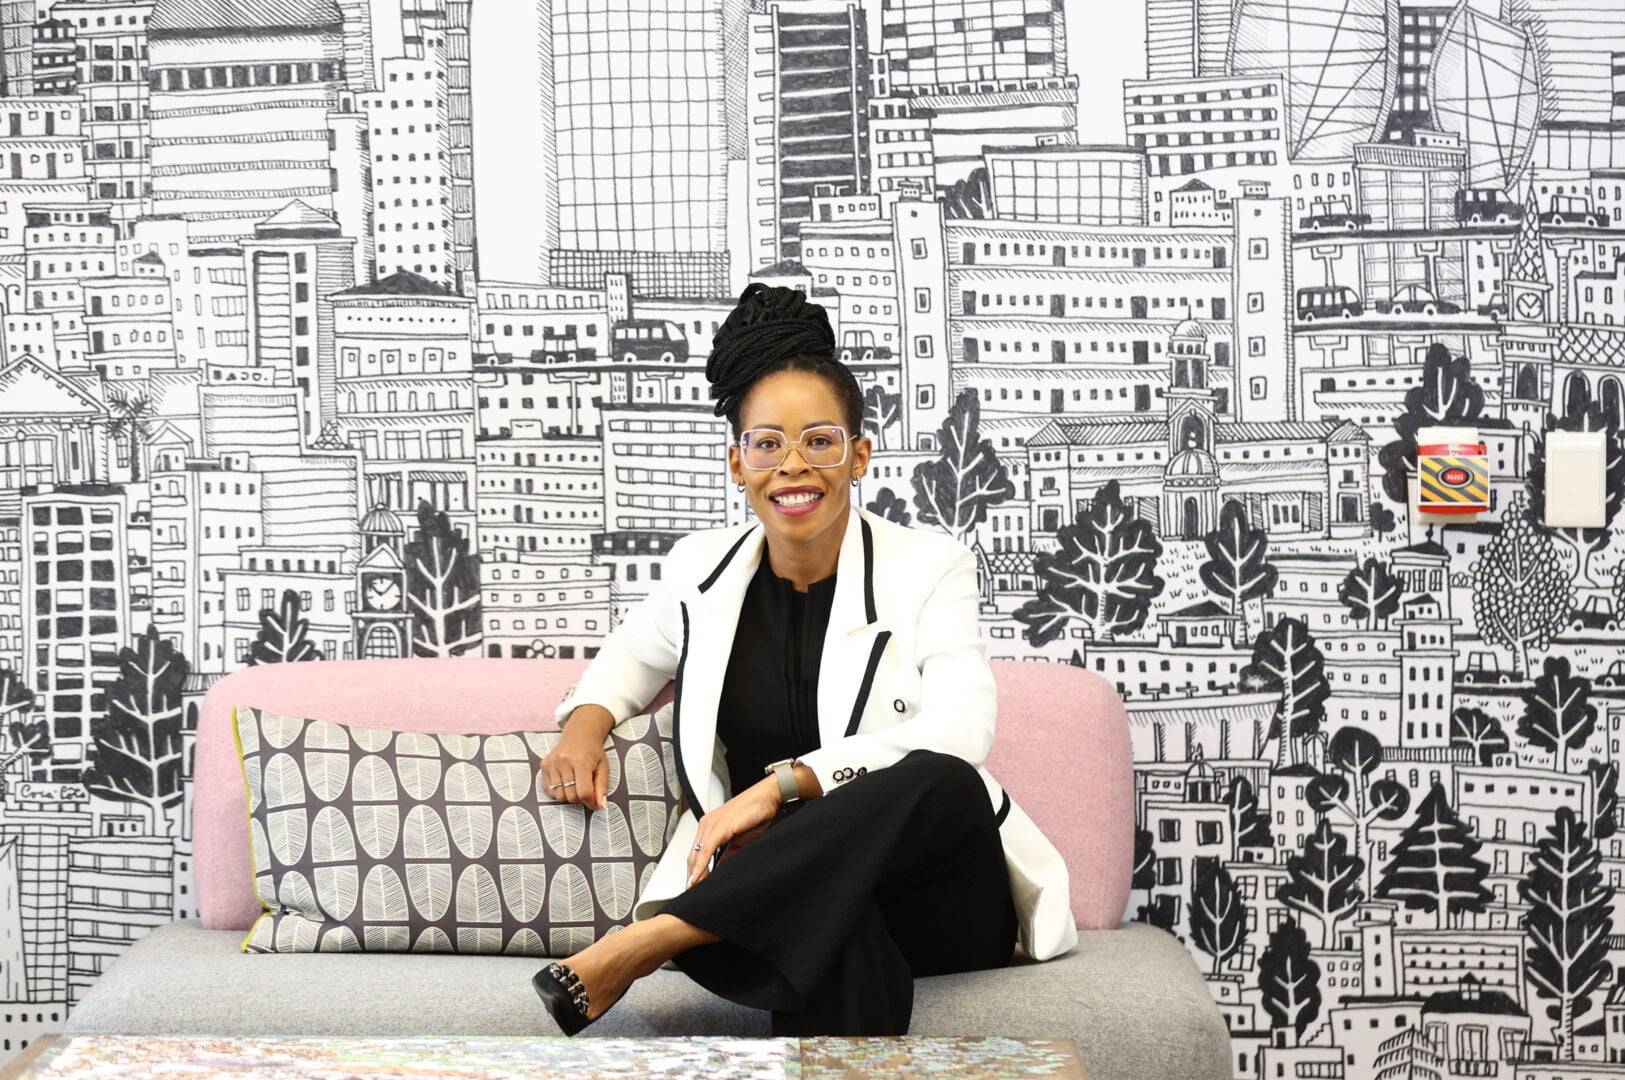 Queen Mokulubete, a Black South African woman with black hair in long braids up in a bun and glasses, She is wearing a white blazer, black blouse and black trousers. She is smiling as she poses on a pink sofa in her office in front of a wall covered in black and white line drawings.